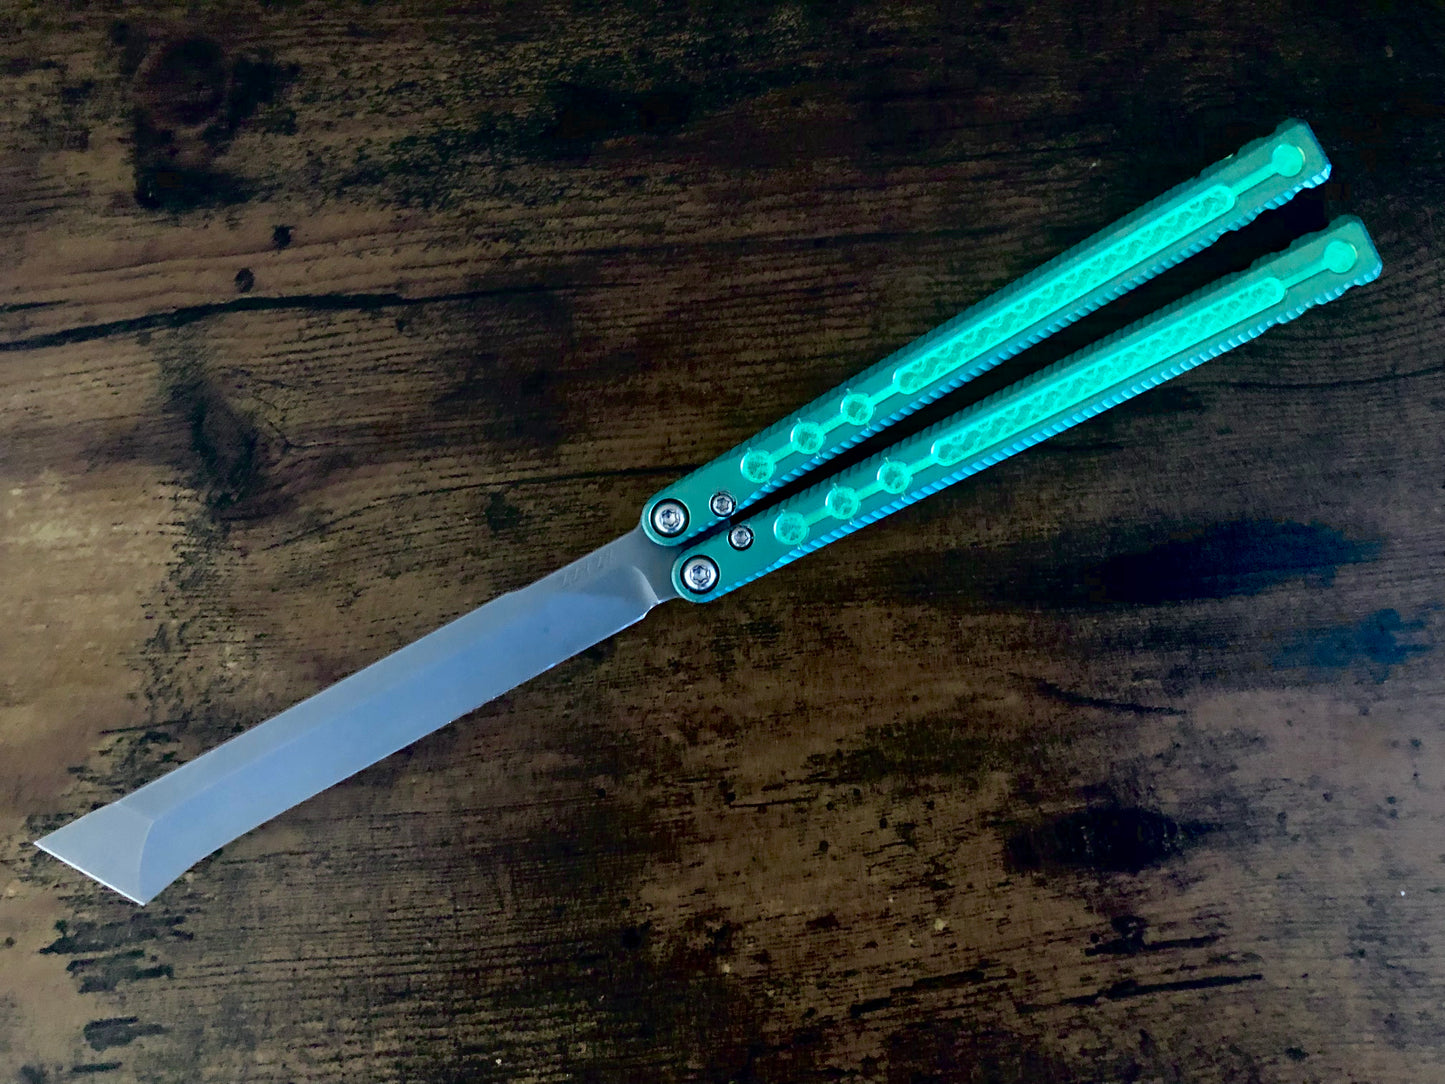 Modify the grip, deepen sound, and add a pop of color with these polyurethane Zippy handle inlays designed for the Acidwrx ZZYZX balisong.